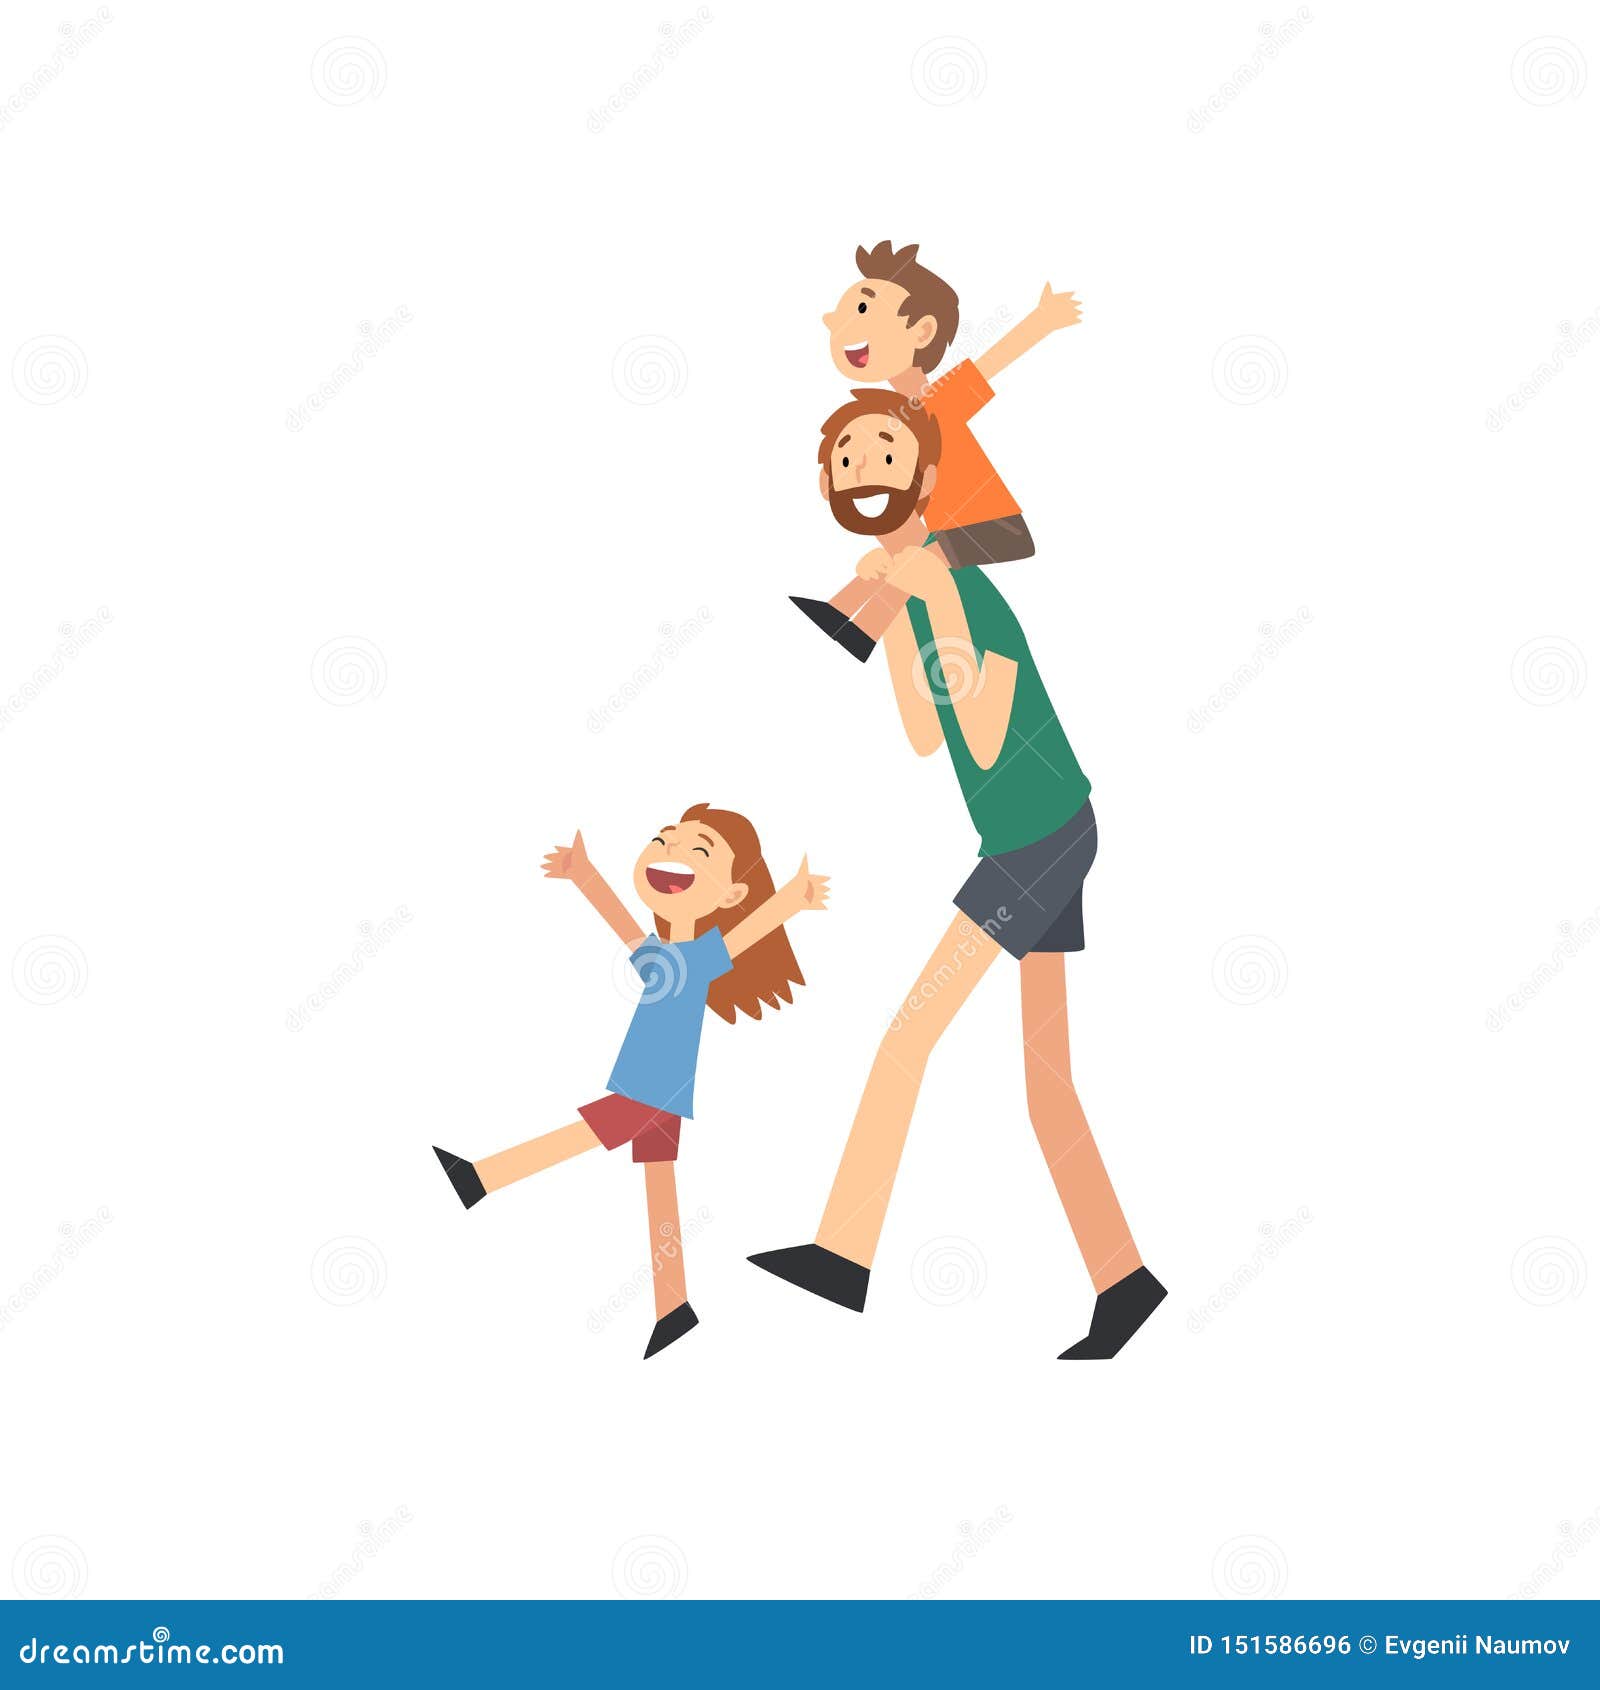 dad and son spending good time together, dad carrying son on his shoulders, happy family concept cartoon 